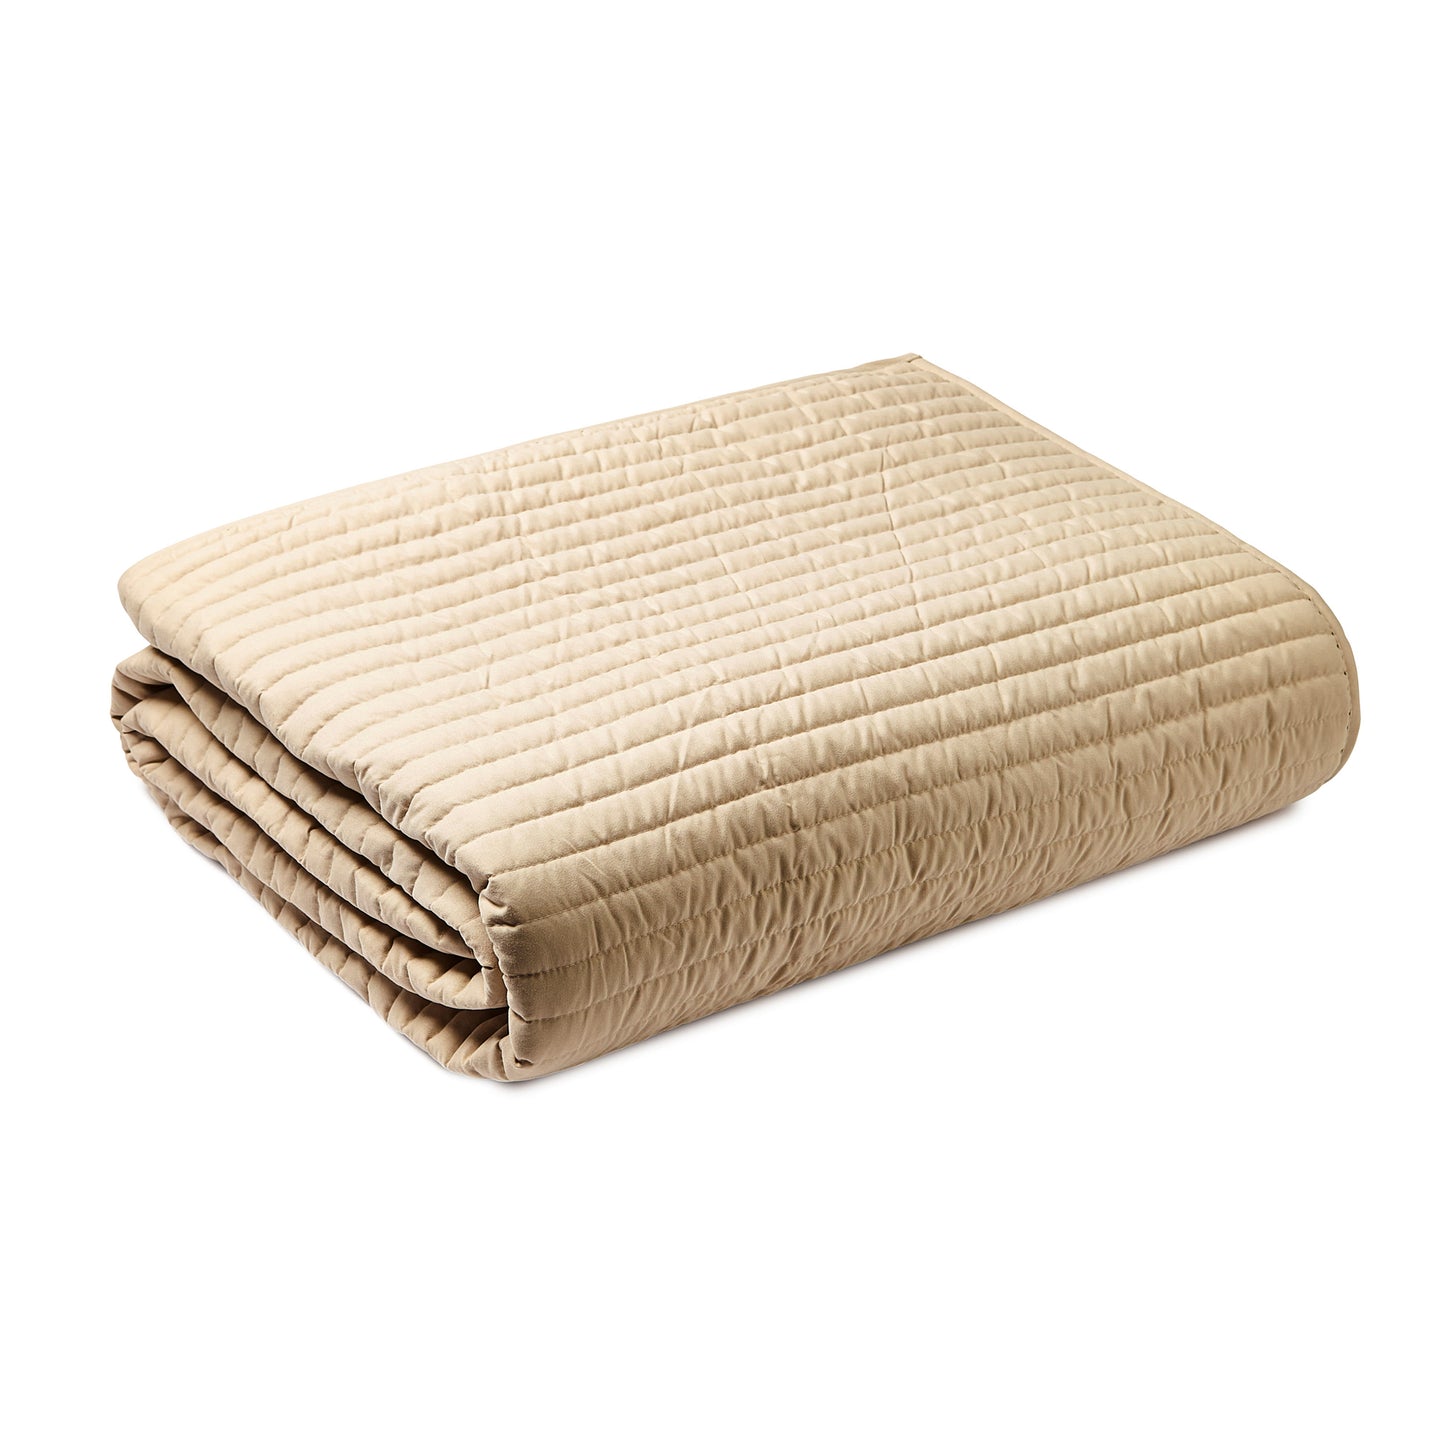 Bianca Natural Quilted Lines Bedspread (220cm x 230cm)